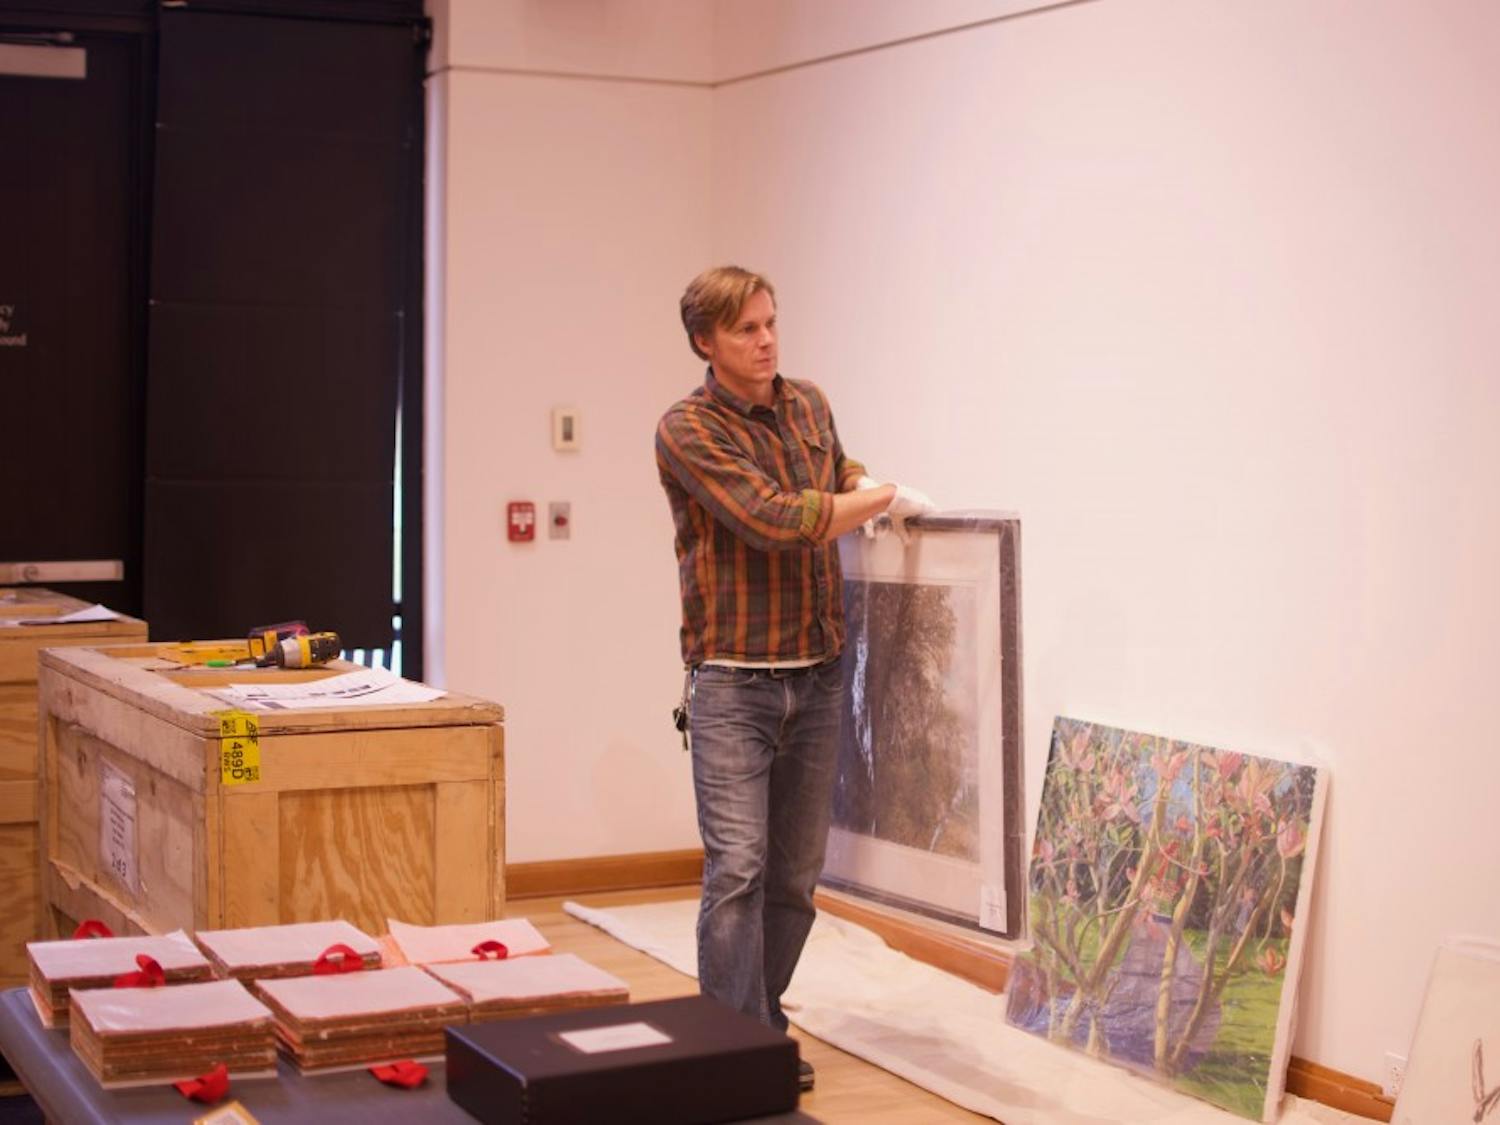 Gallery curator Jeremie Riggleman sets up the new exhibit.